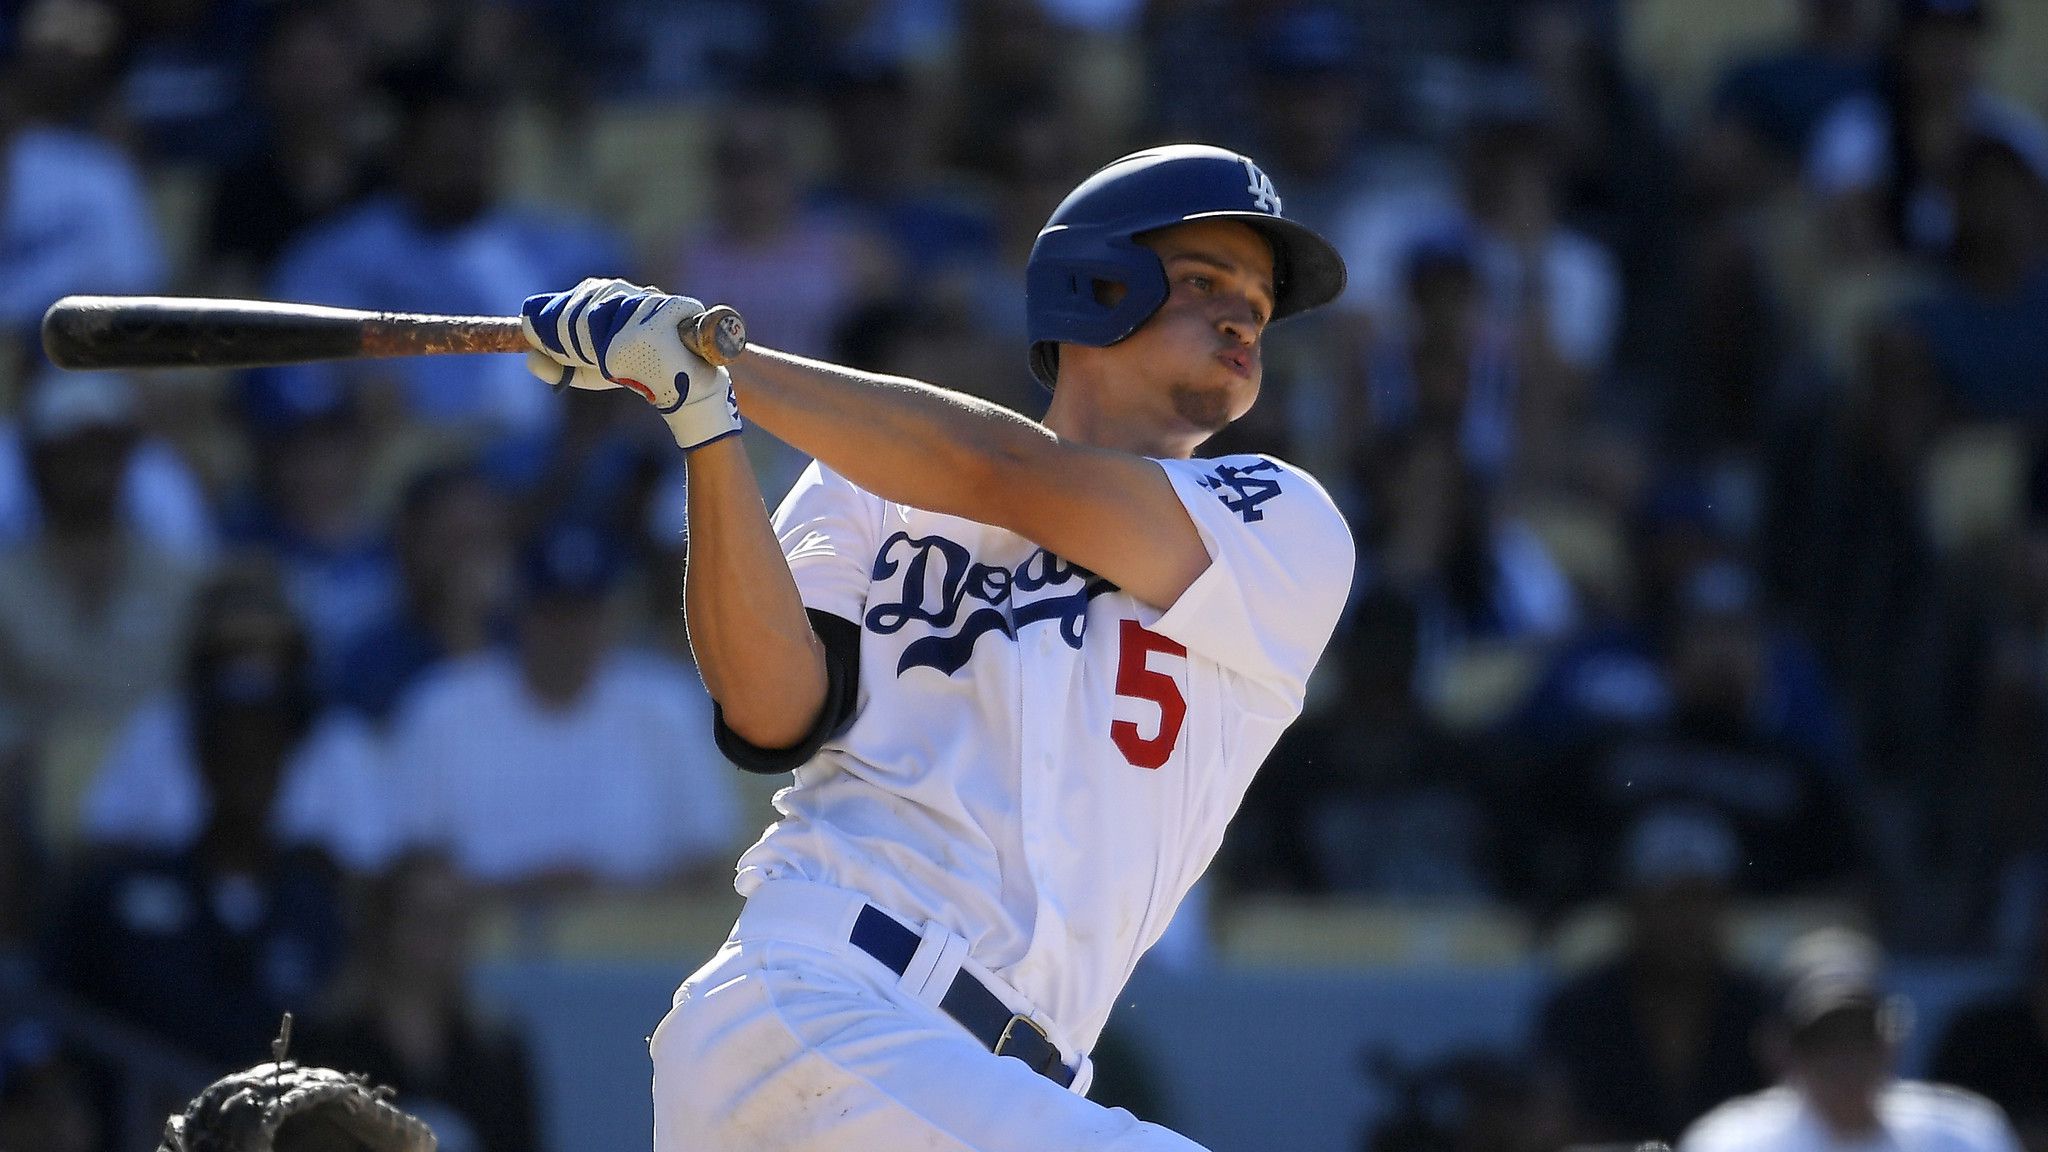 Dodgers All-Star Corey Seager stays motivated to stick at